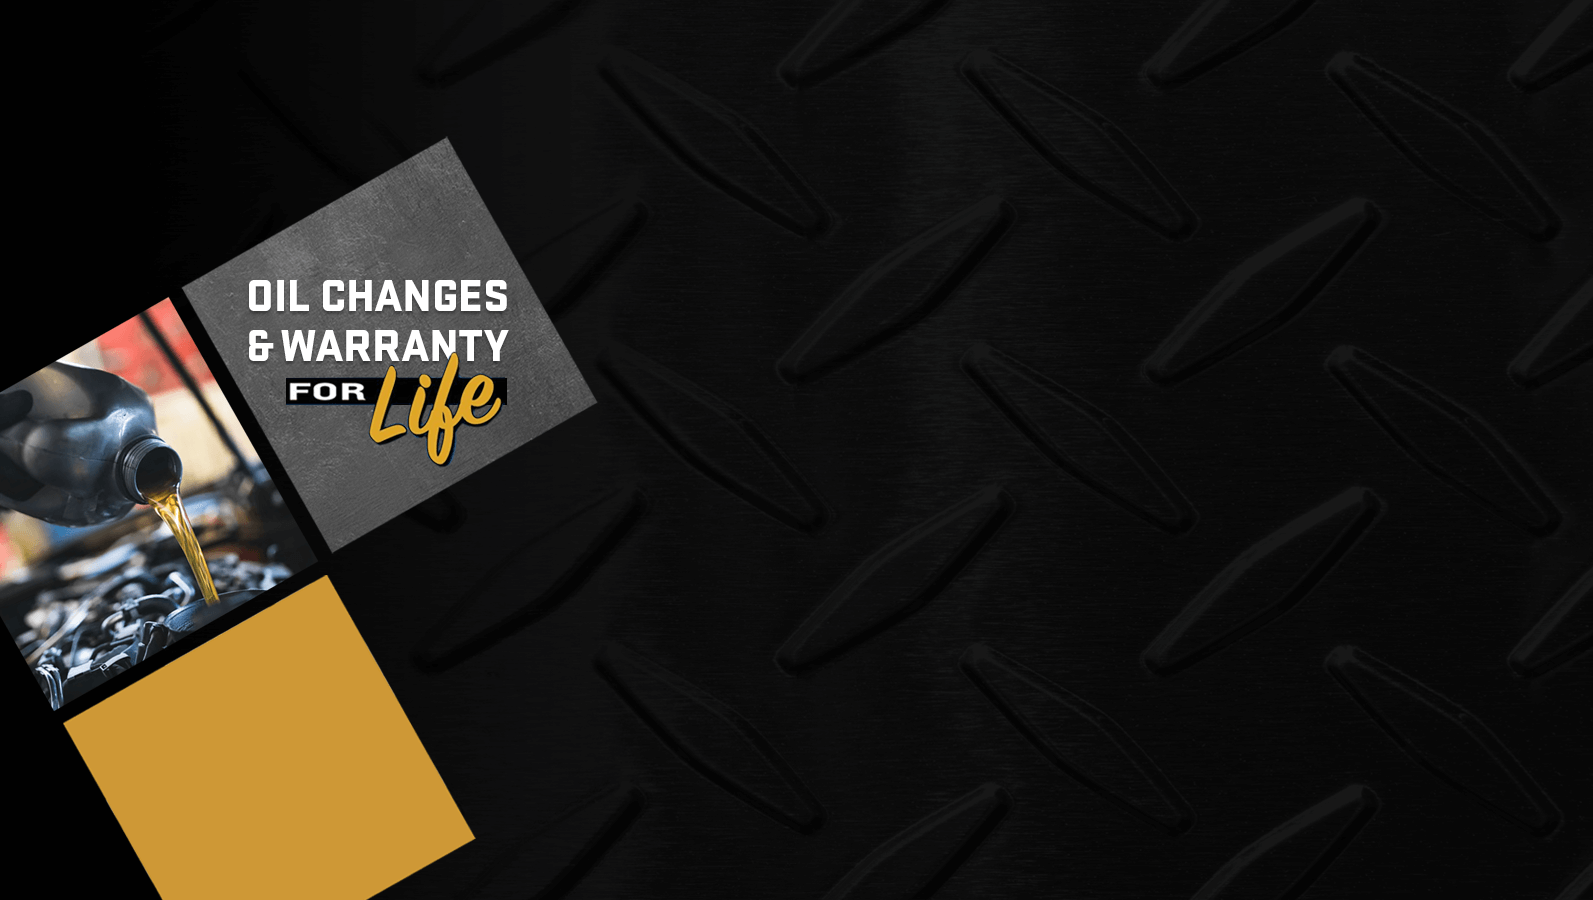 Oil Changes for Life - Learn More